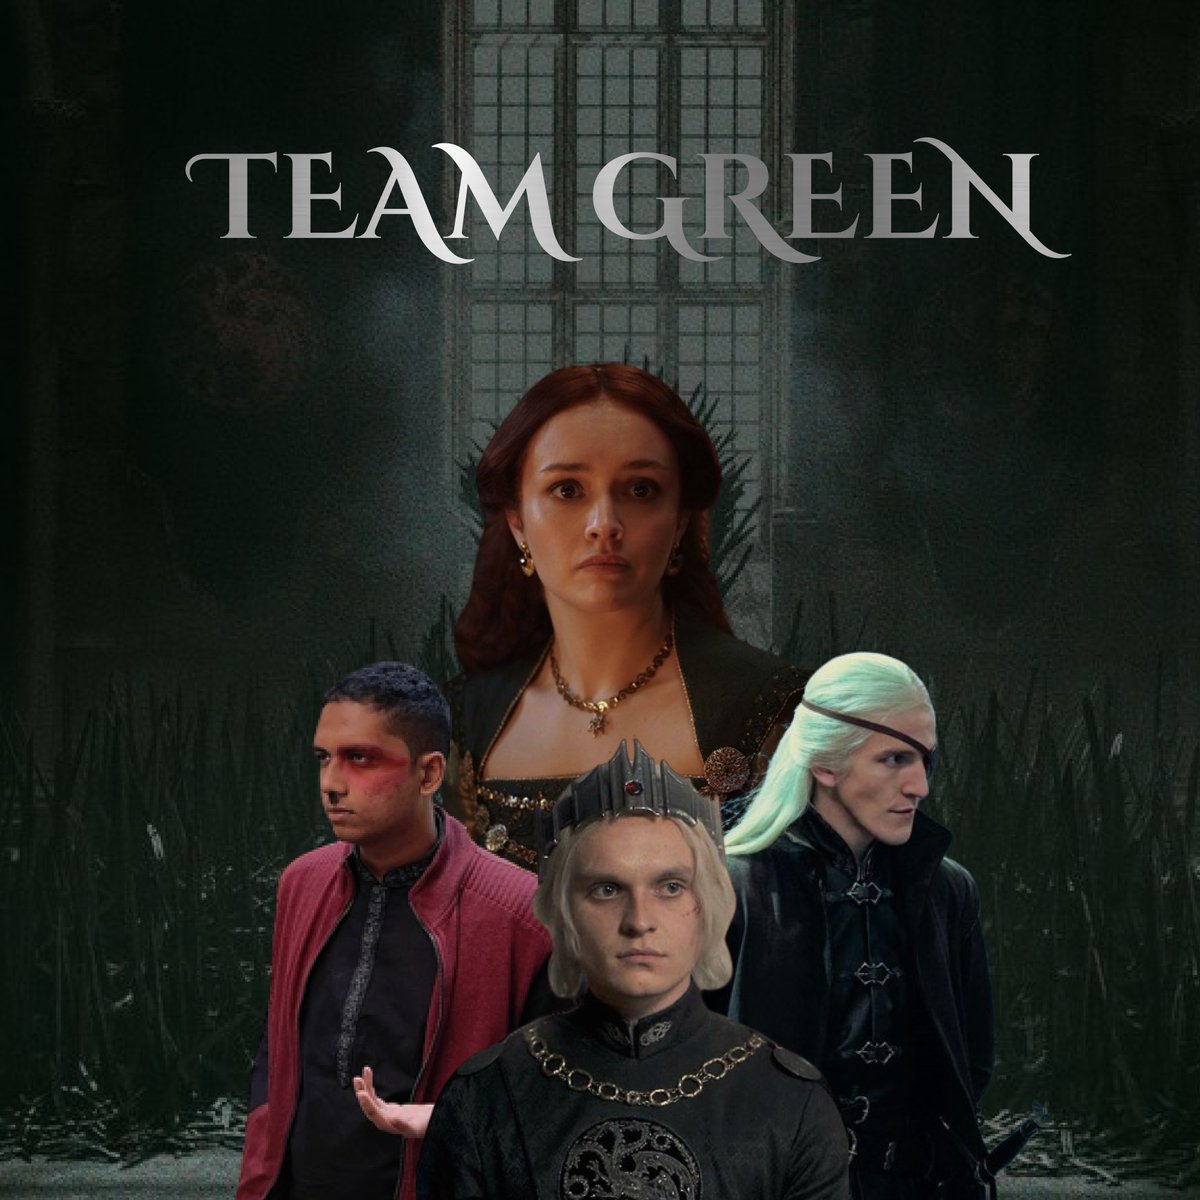 #HouseOfTheDragon is coming, and I am hyped.
I am #TeamGreen